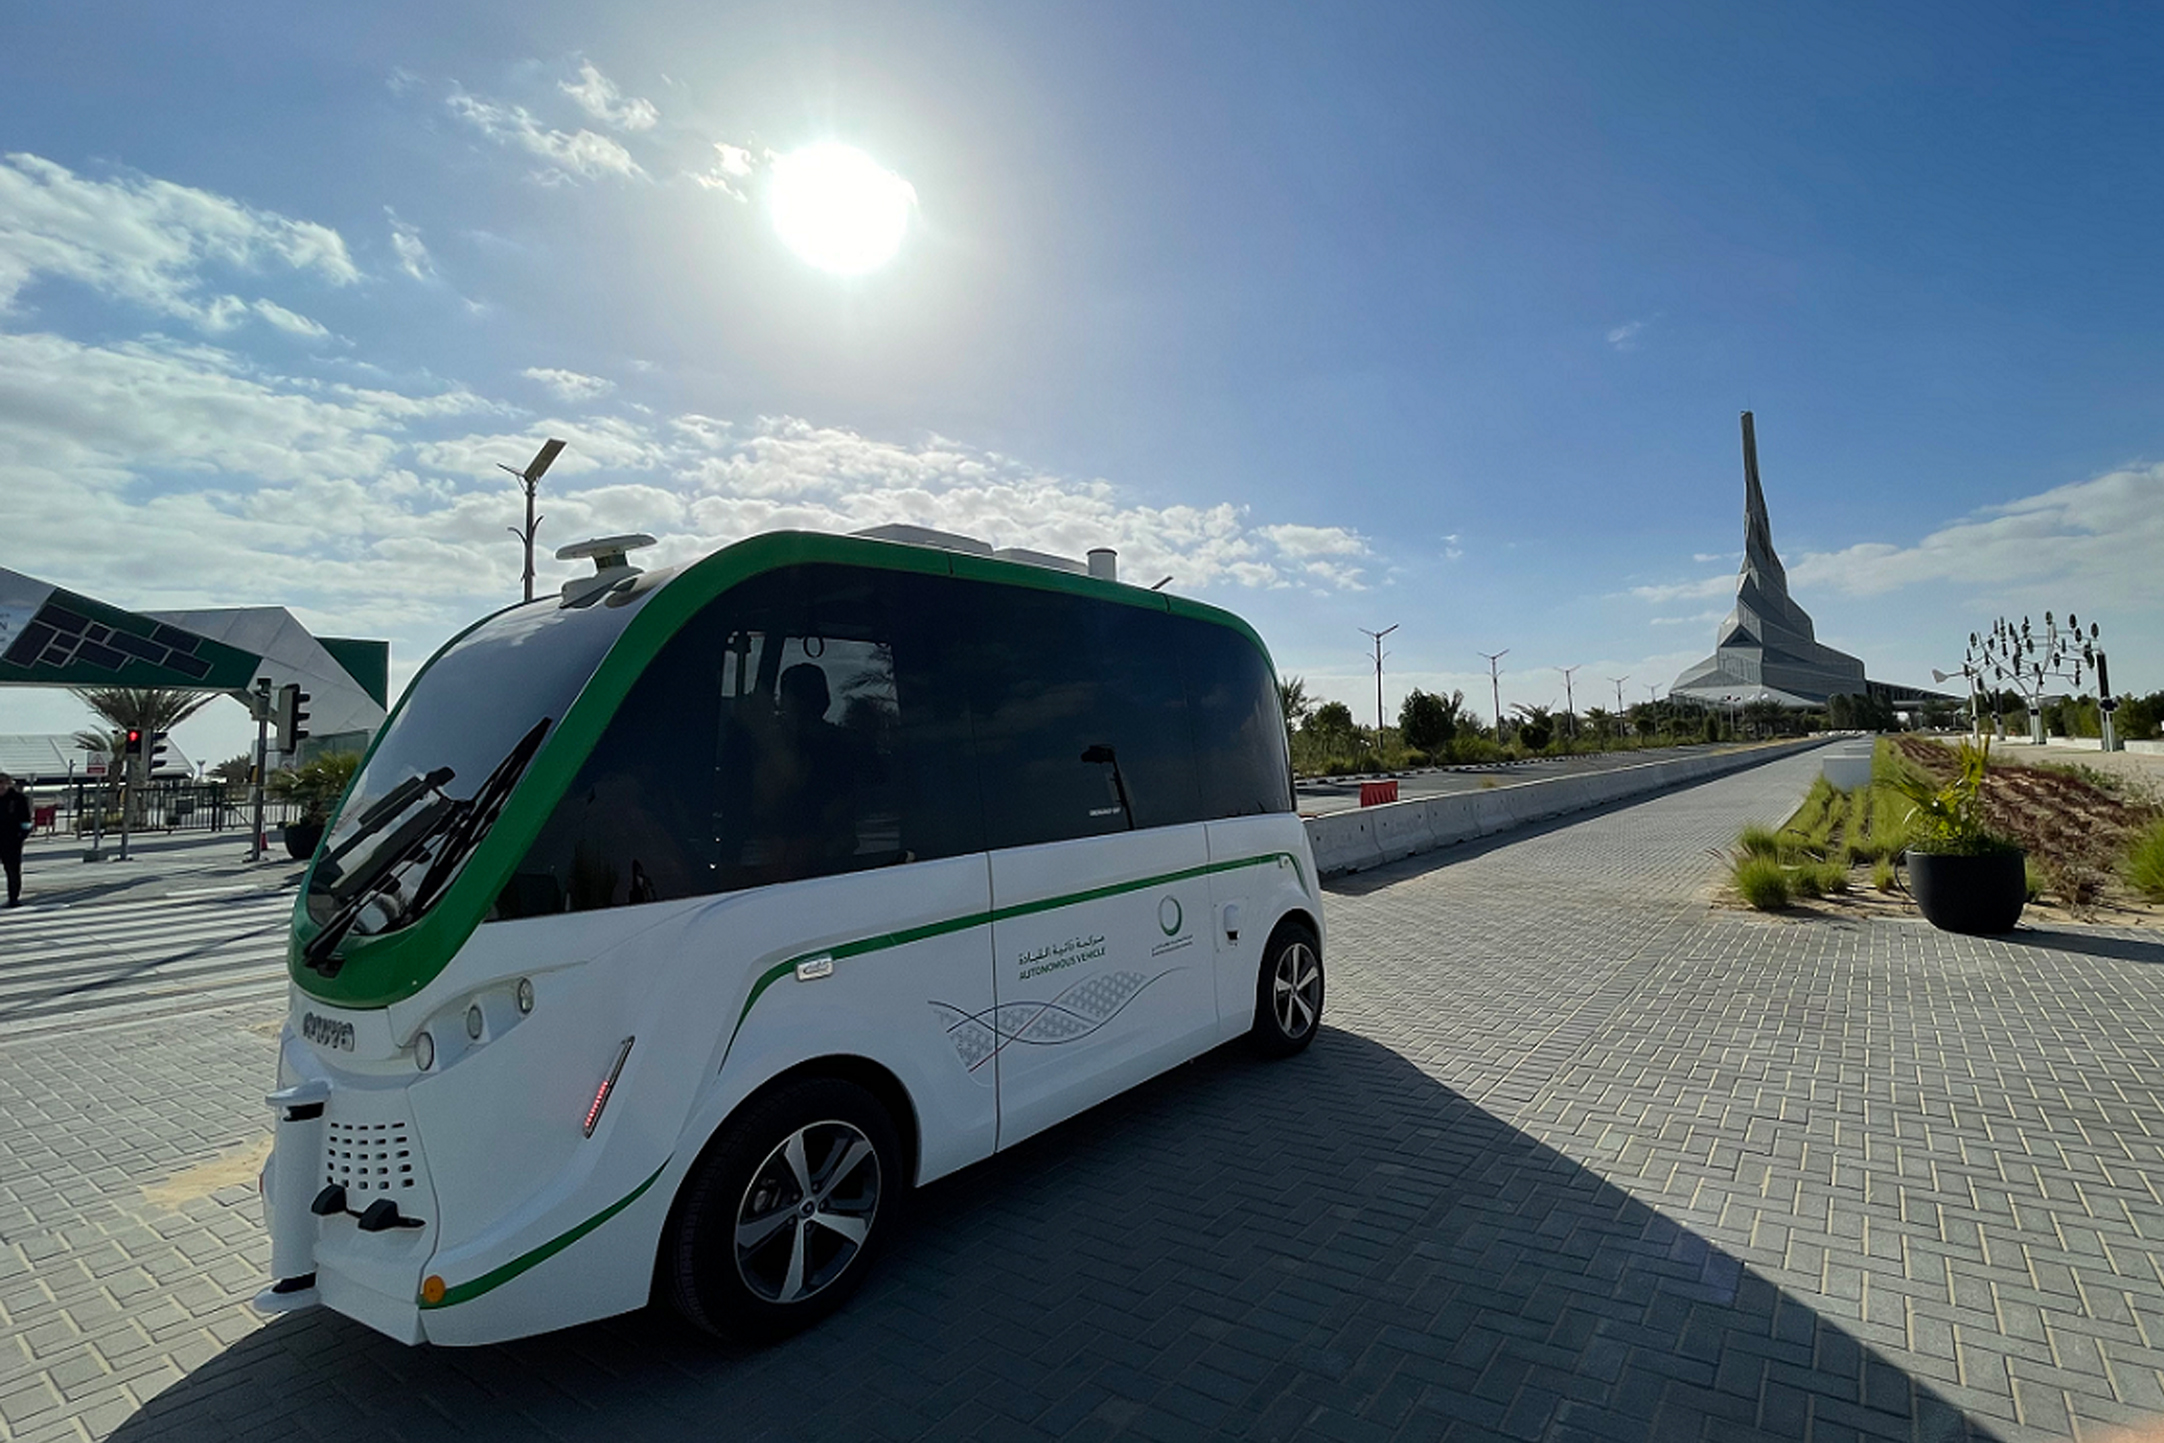 DEWA’s Innovation Centre provides visitors an experience to test autonomous electric buses